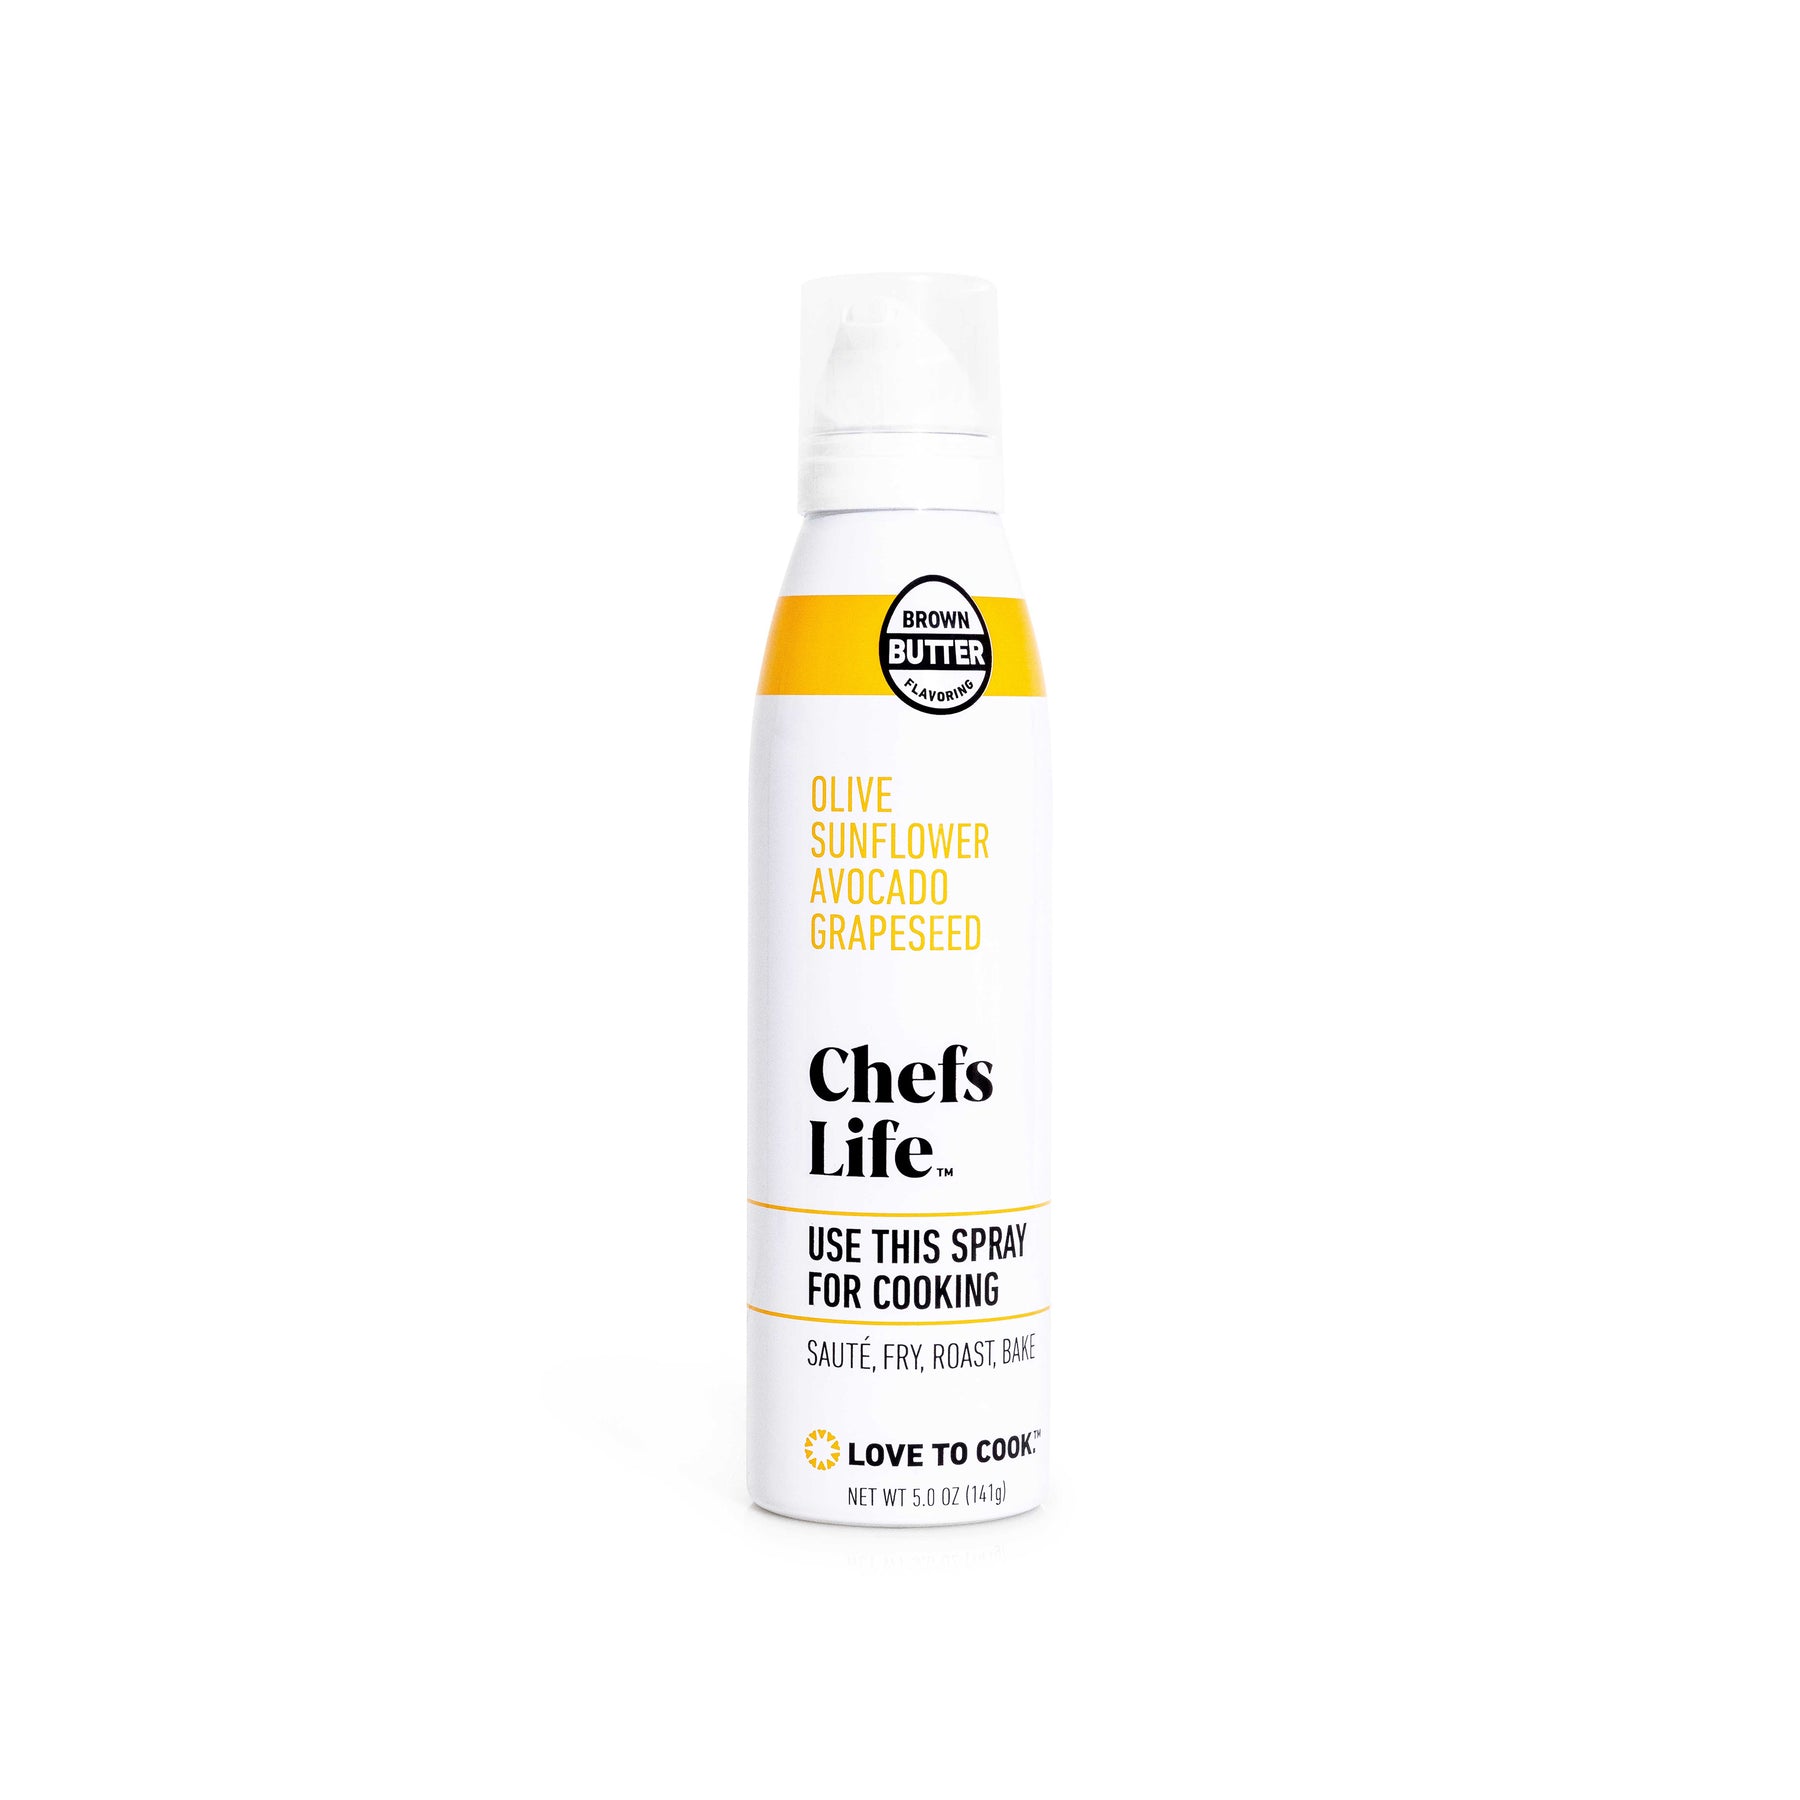 Chefs Life Butter Cooking Spray - For A Delicious Brown Butter Taste